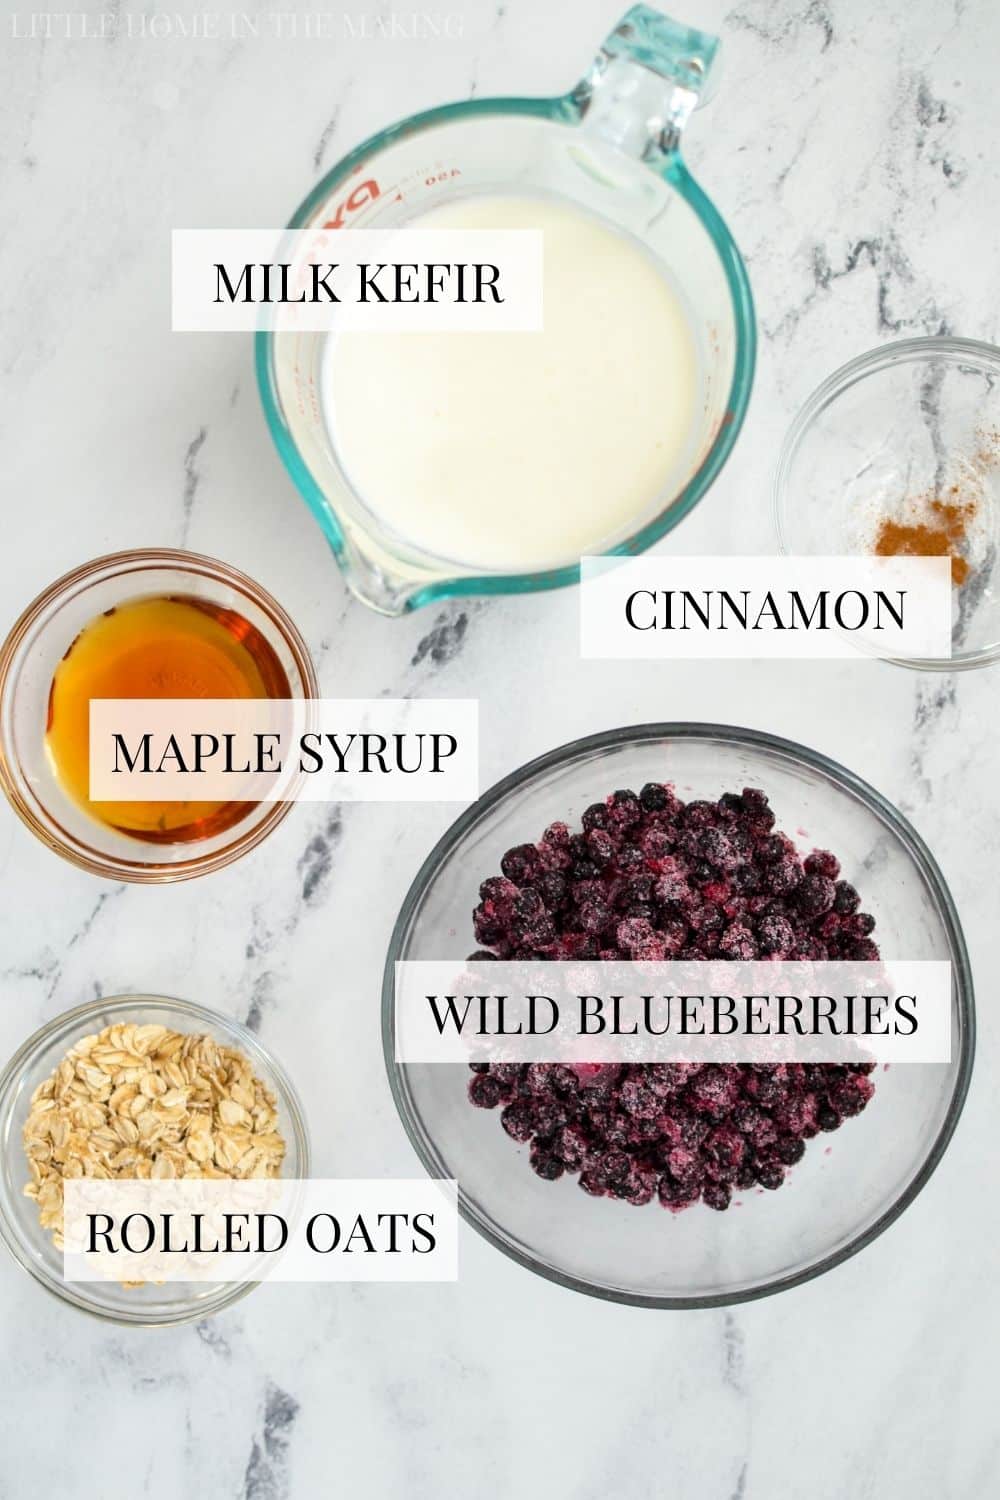 The ingredients needed to make a blueberry kefir smoothie